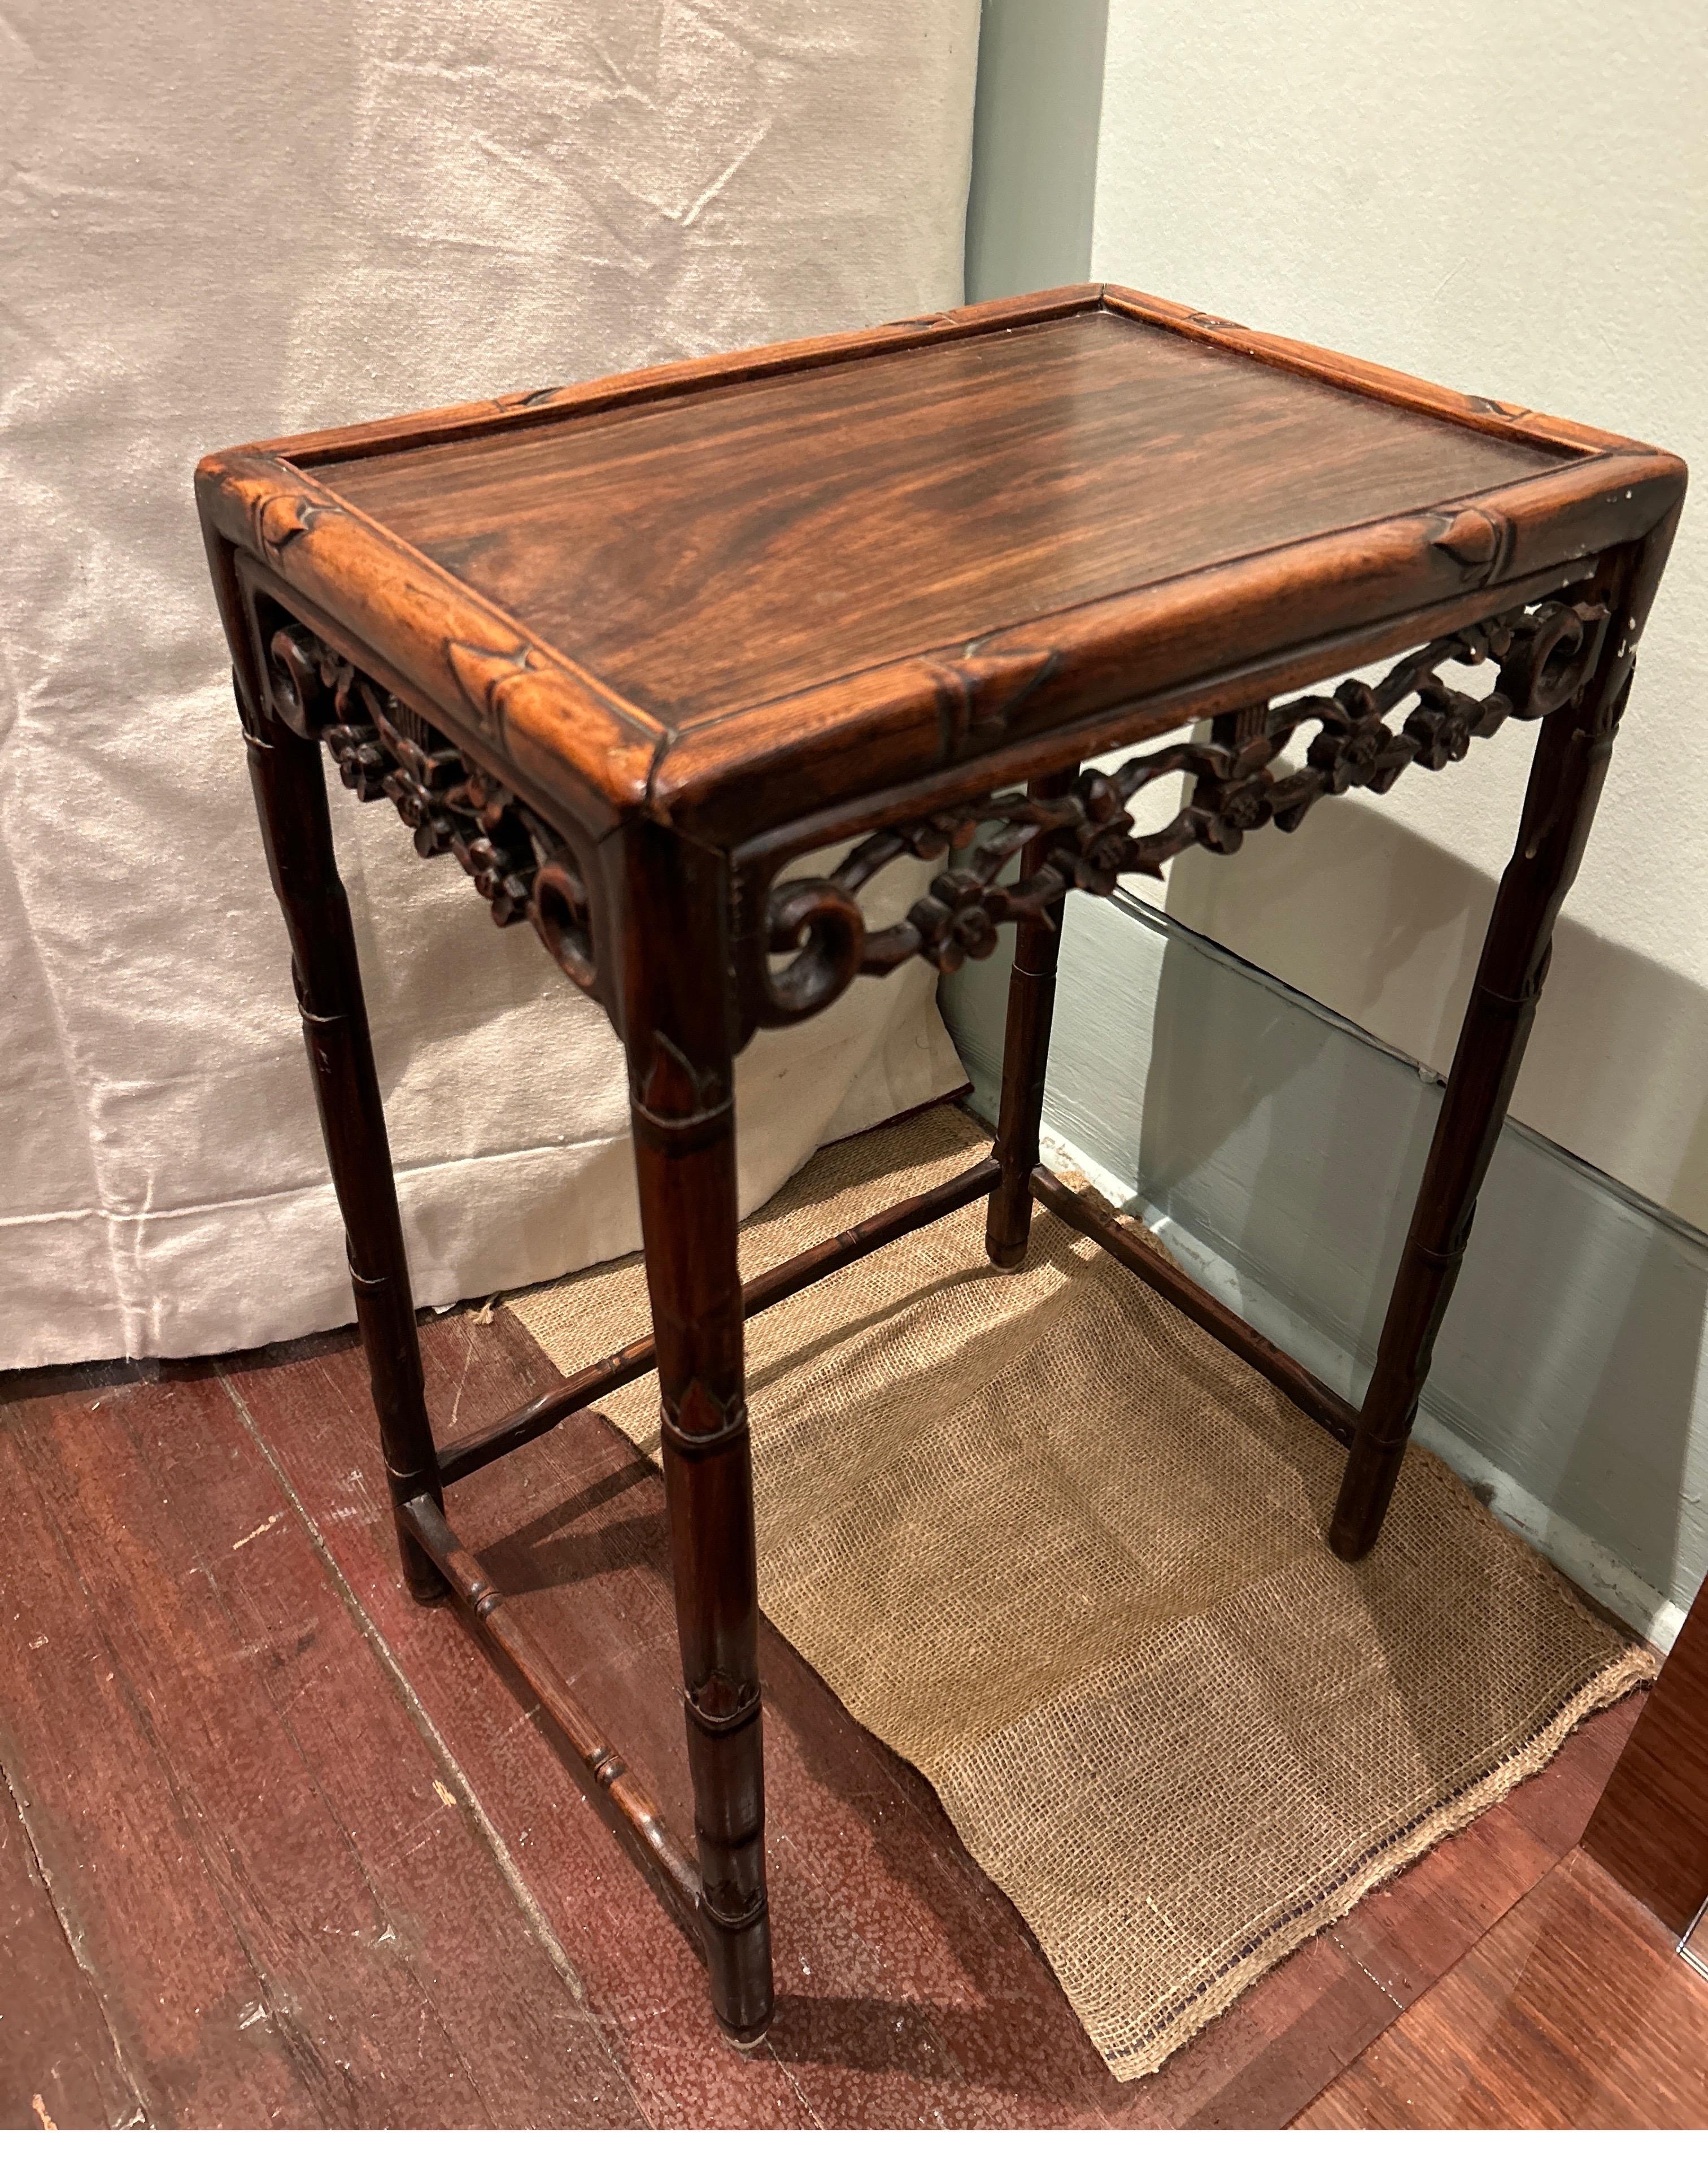 Late Qing Dynasty Rosewood Export Side Table Carved With Floral Bamboo Theme For Sale 1